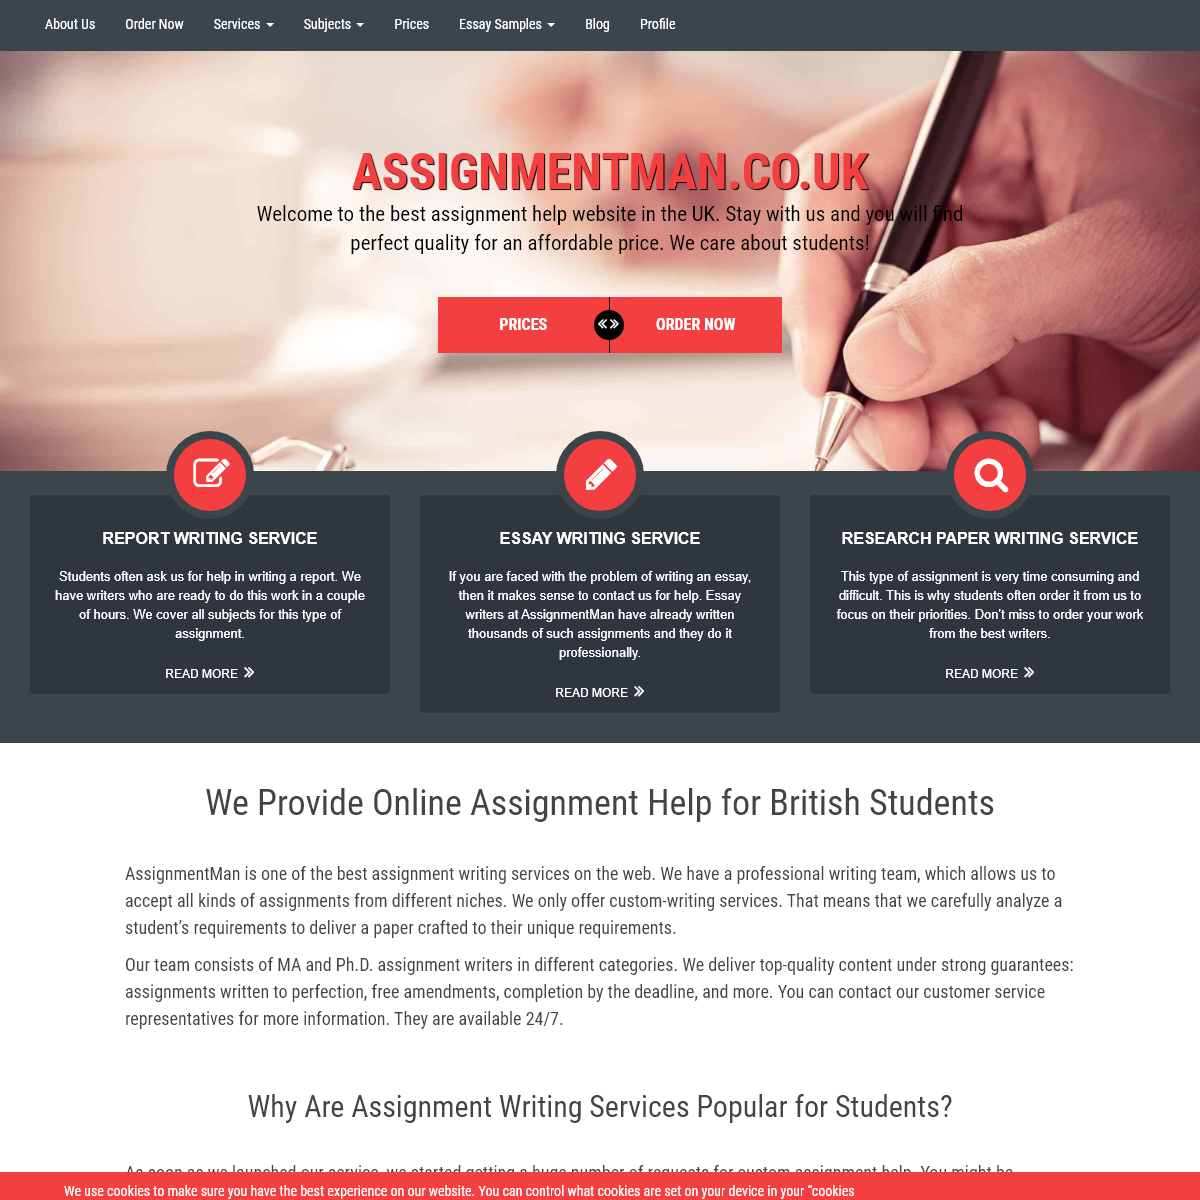 Best Assignment Help in the UK - AssignmentMan is 100- reliable!